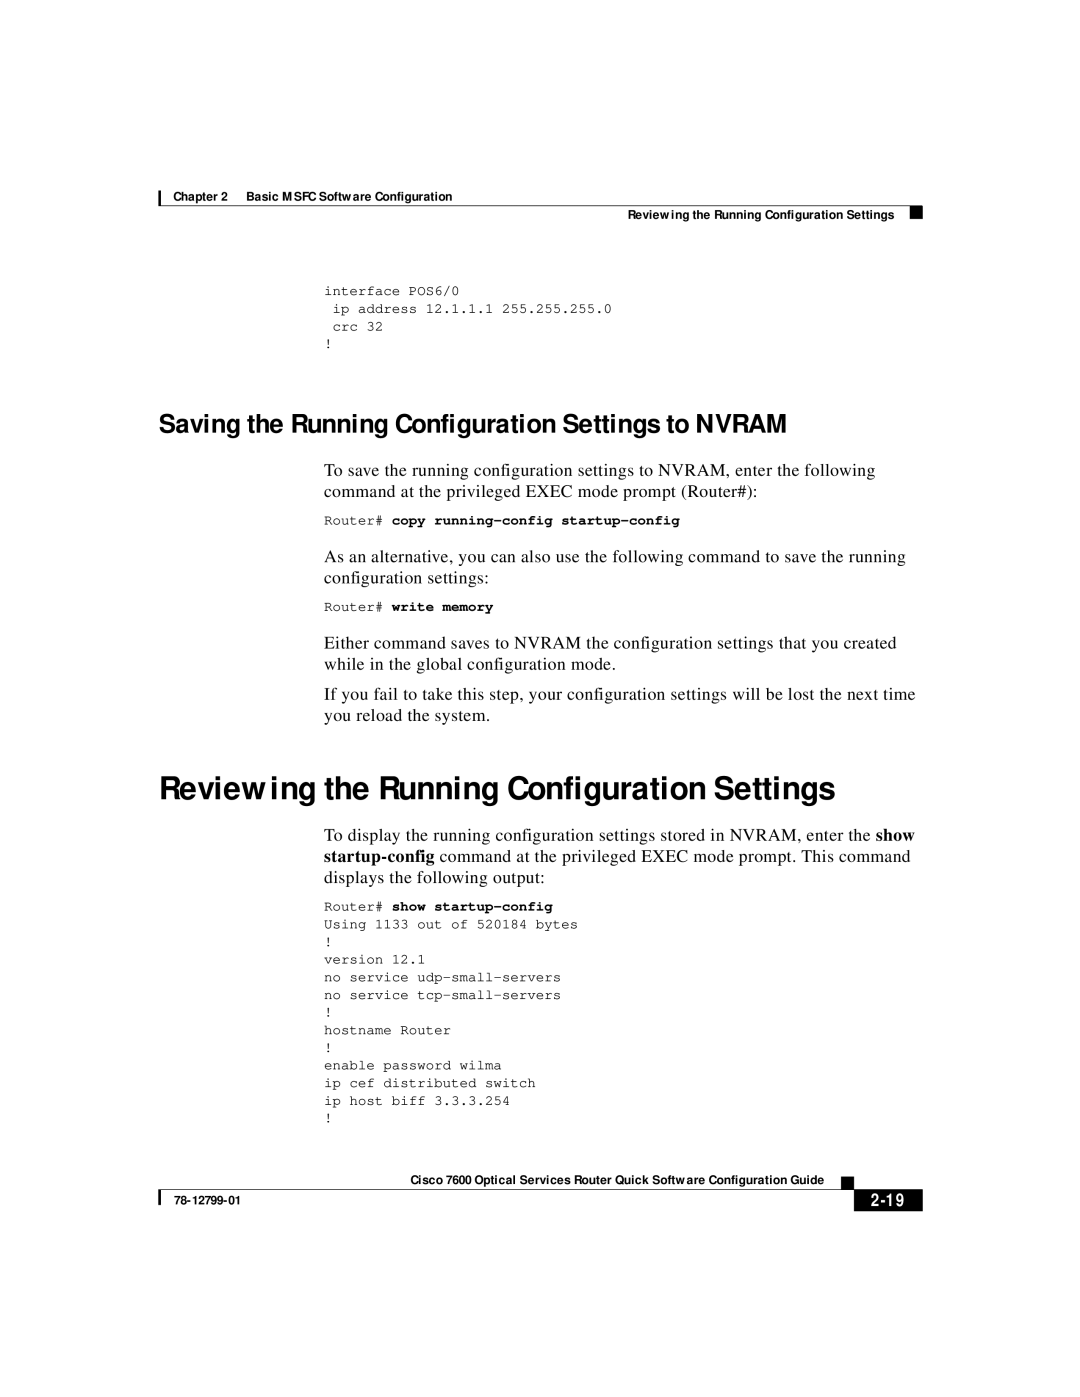 Cisco Systems 7600 Reviewing the Running Configuration Settings, Saving the Running Configuration Settings to NVRAM, 2-19 